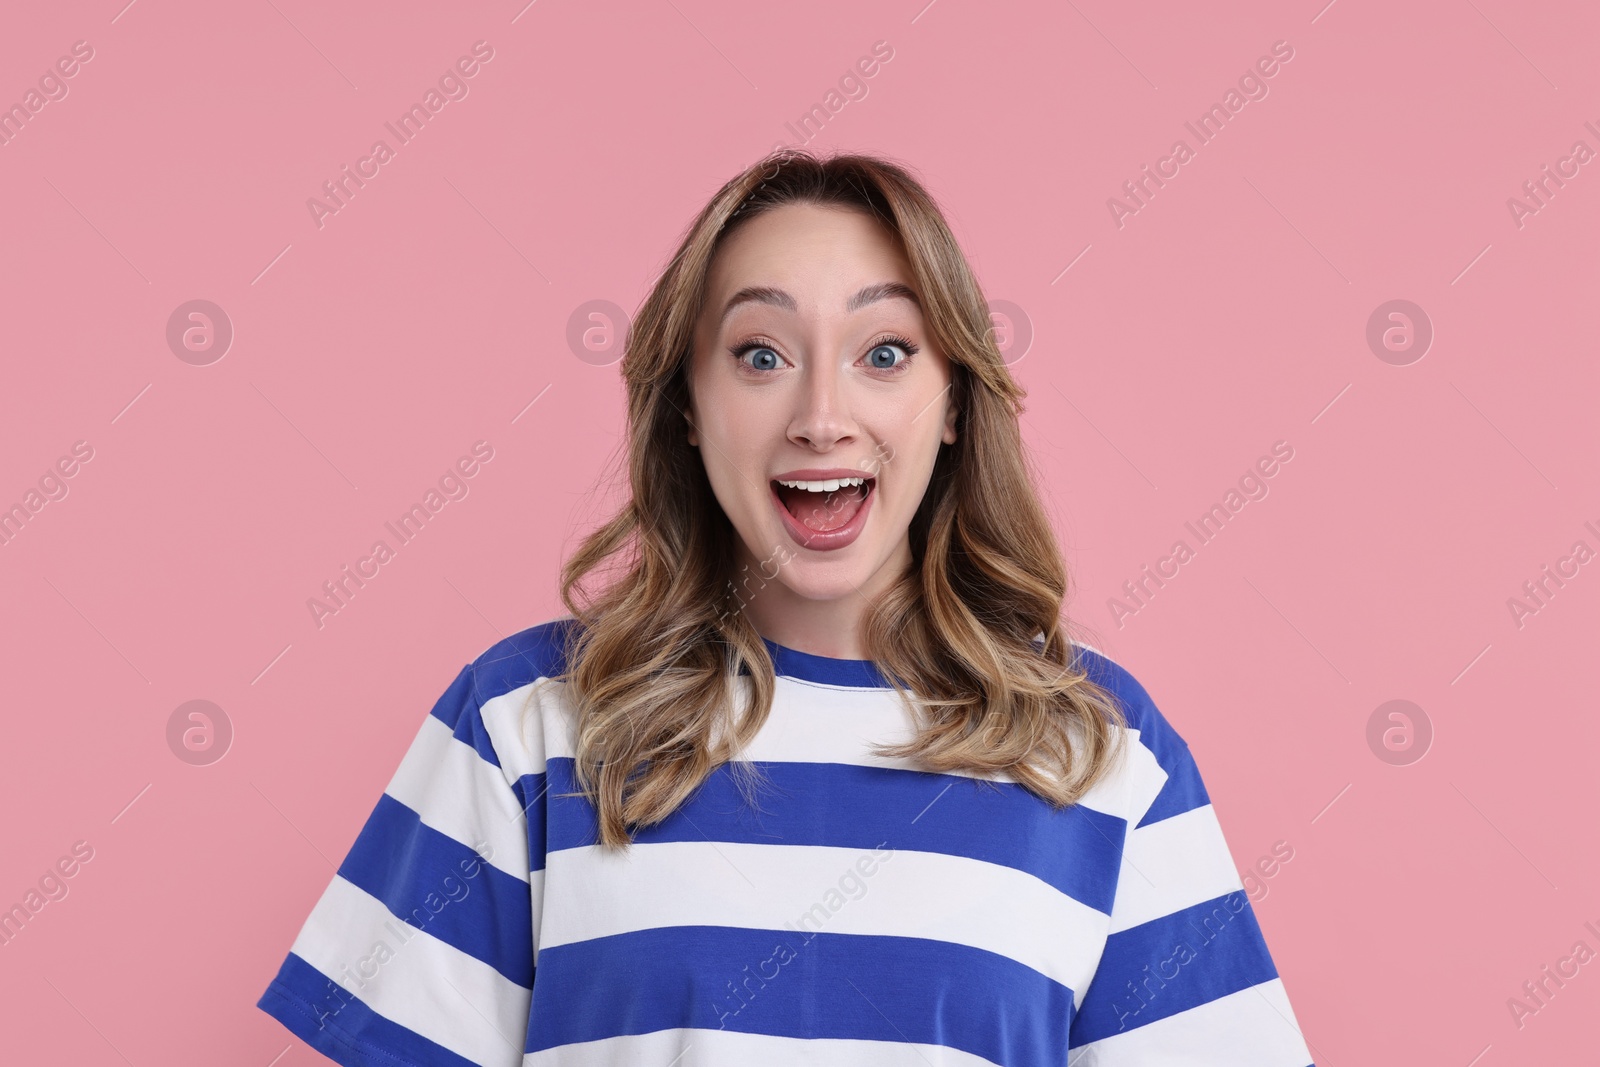 Photo of Portrait of happy surprised woman on pink background